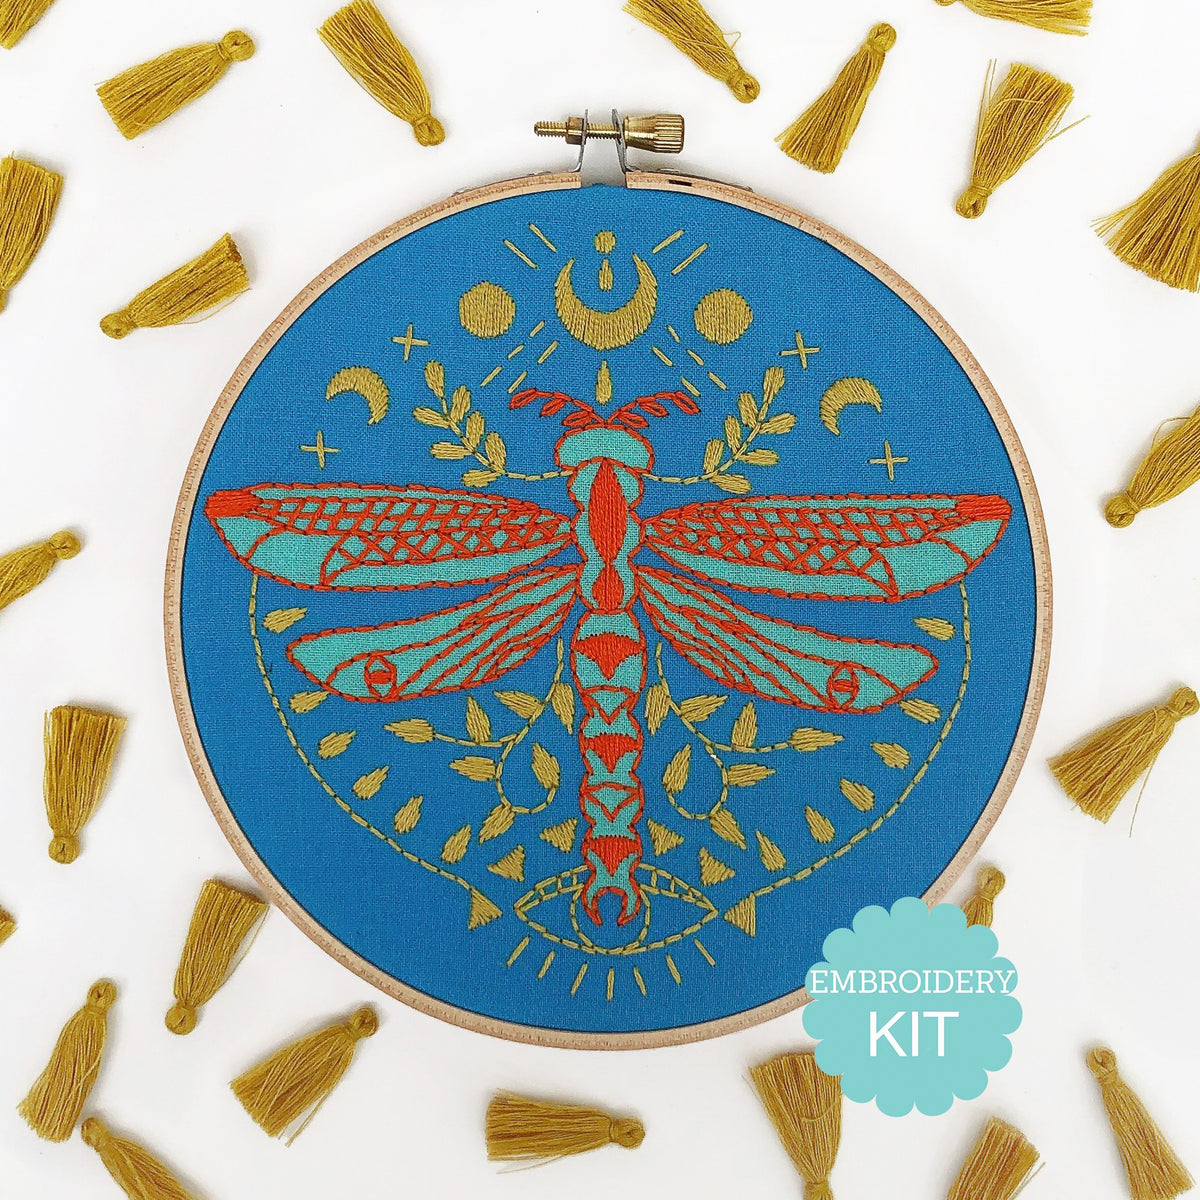 Mystic Dragonfly Hand Embroidery Kit